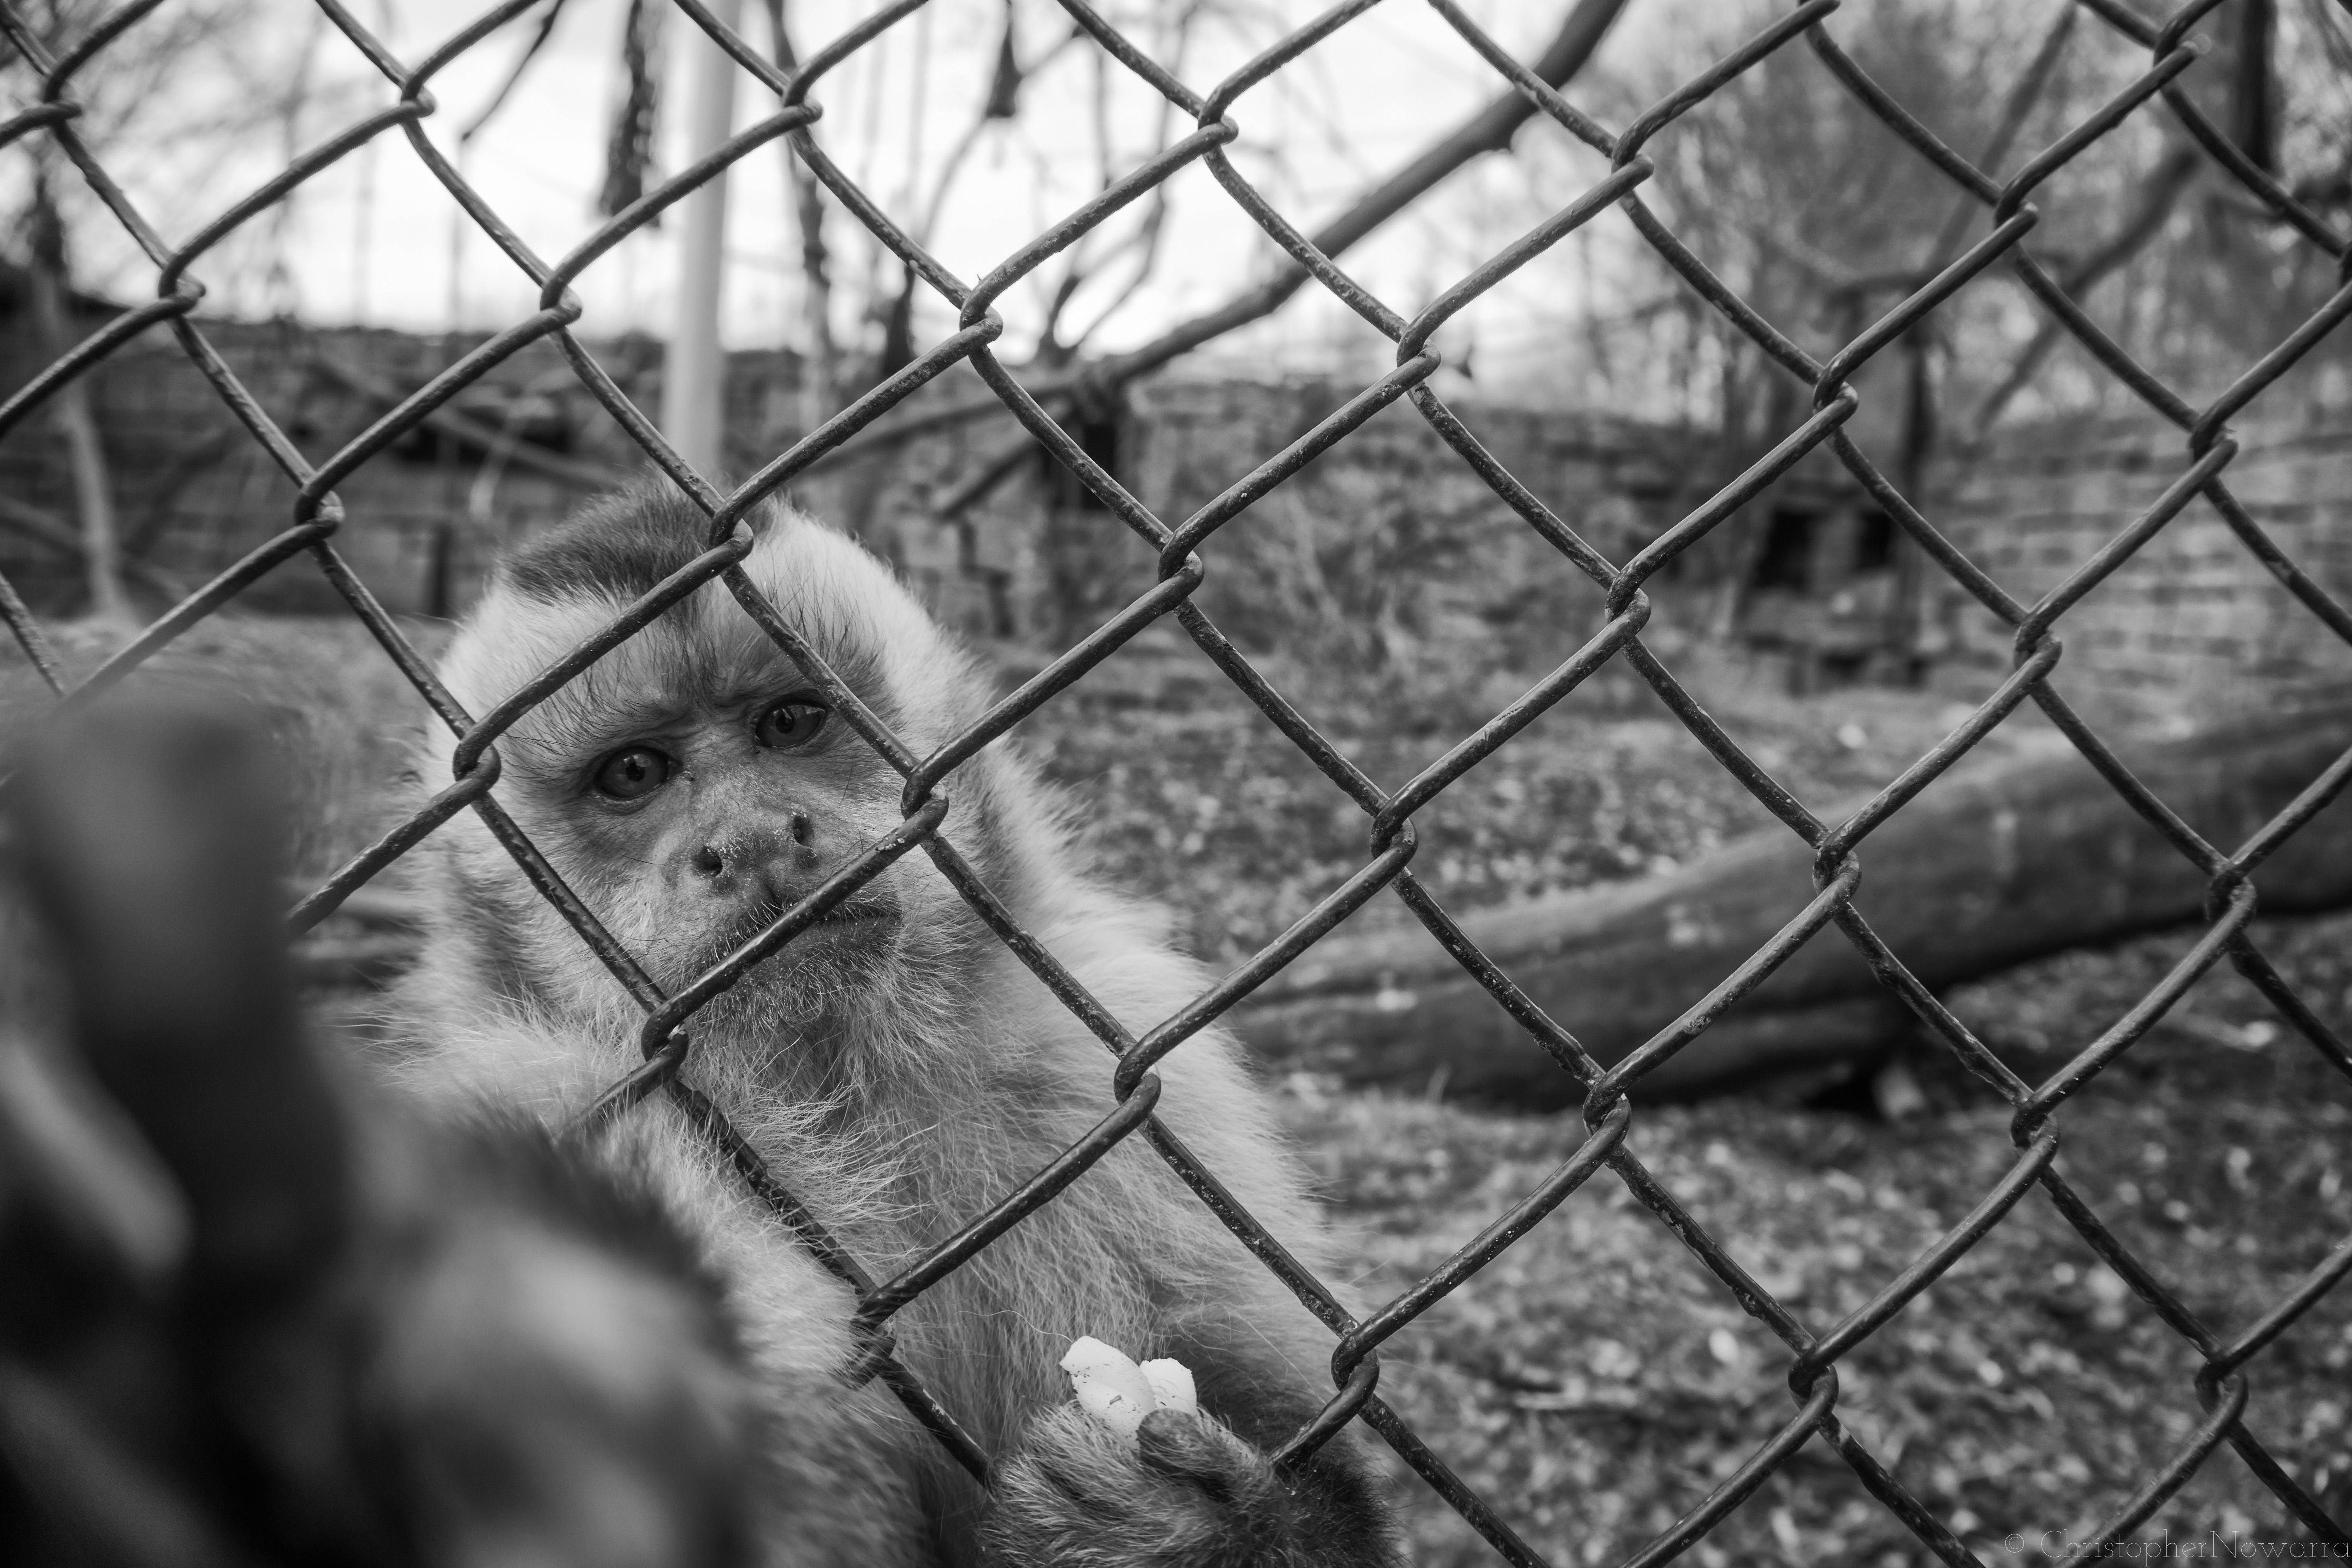 Monkey behind wire mesh fence photo